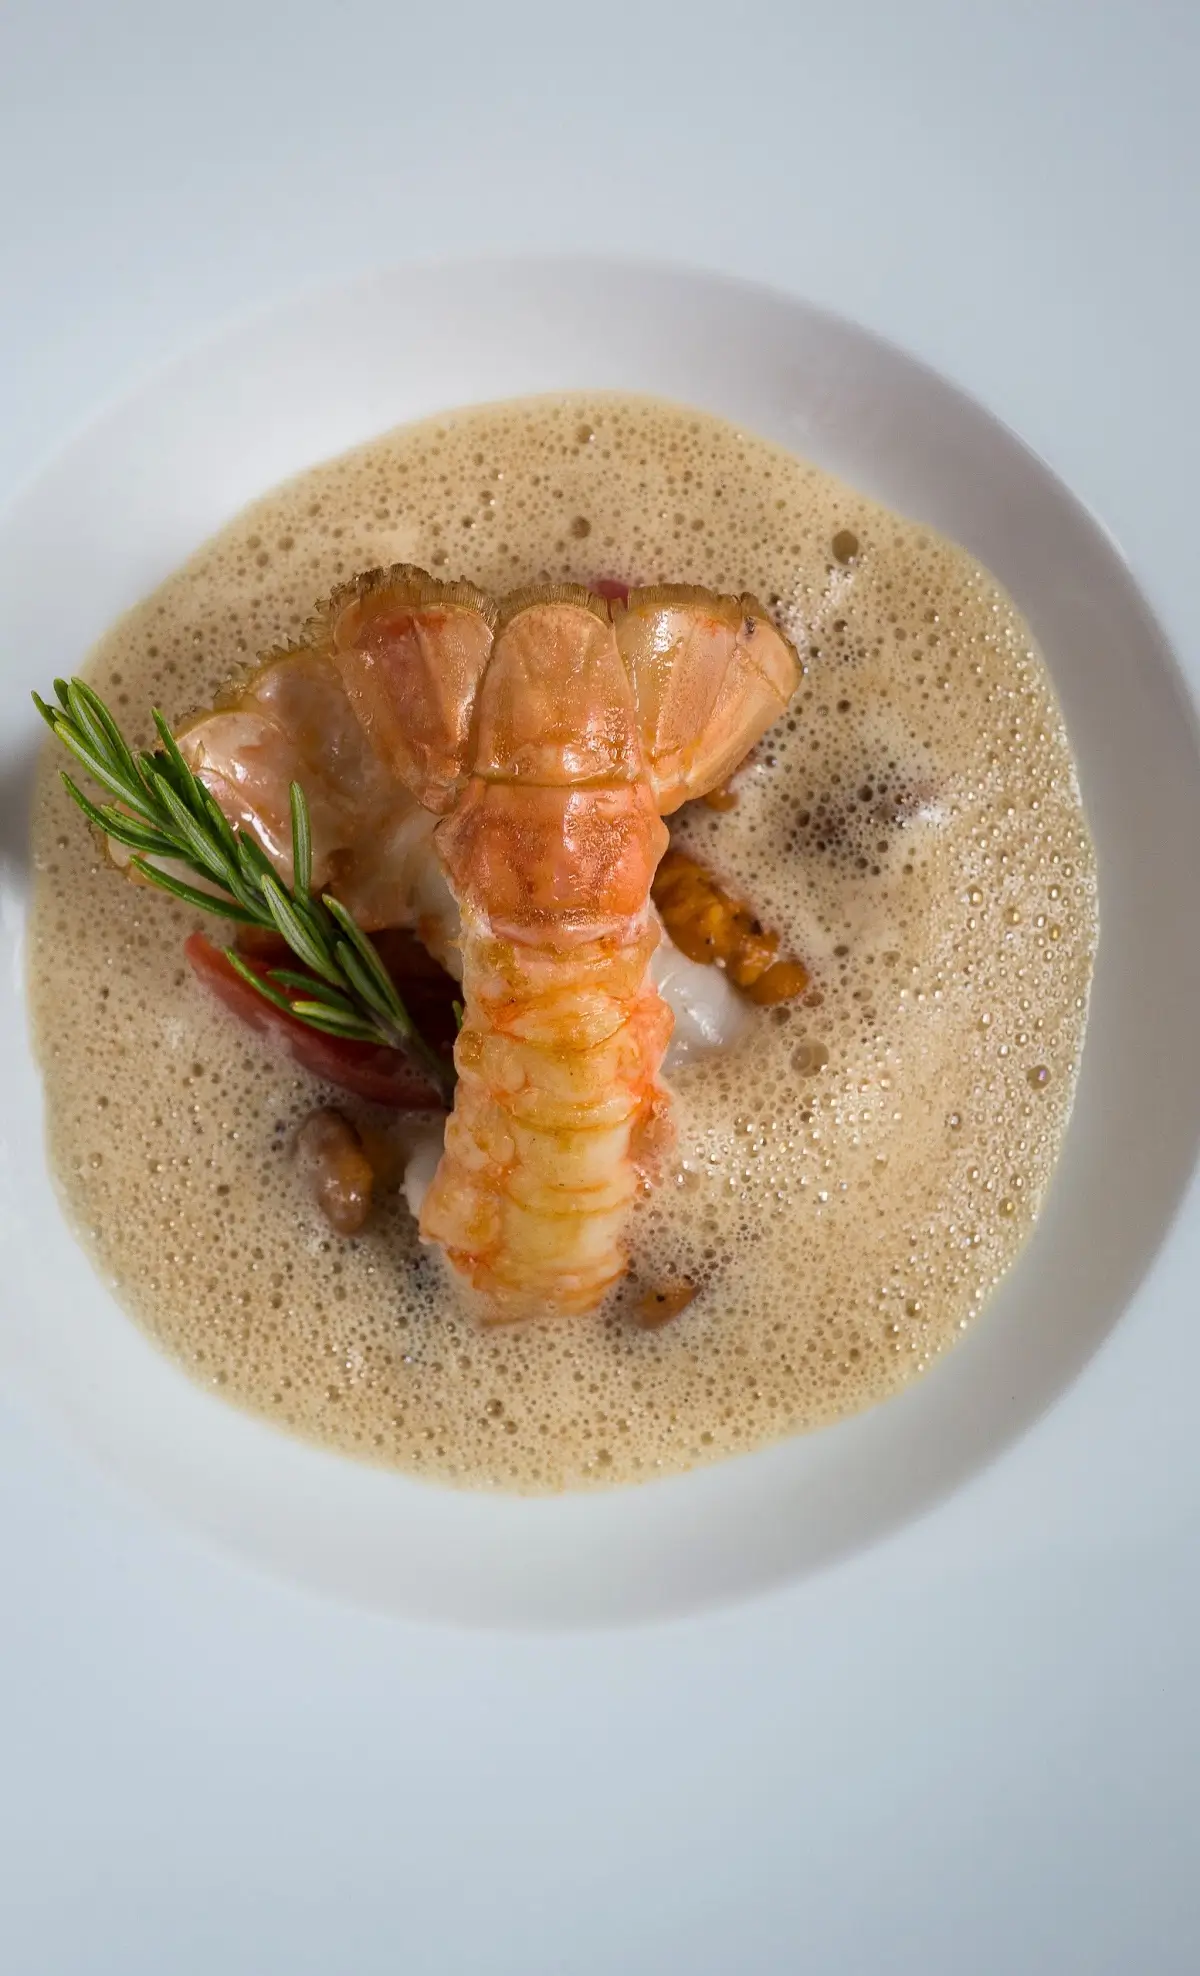 A gourmet dish at Automne, featuring a beautifully plated prawn with foam and garnish.